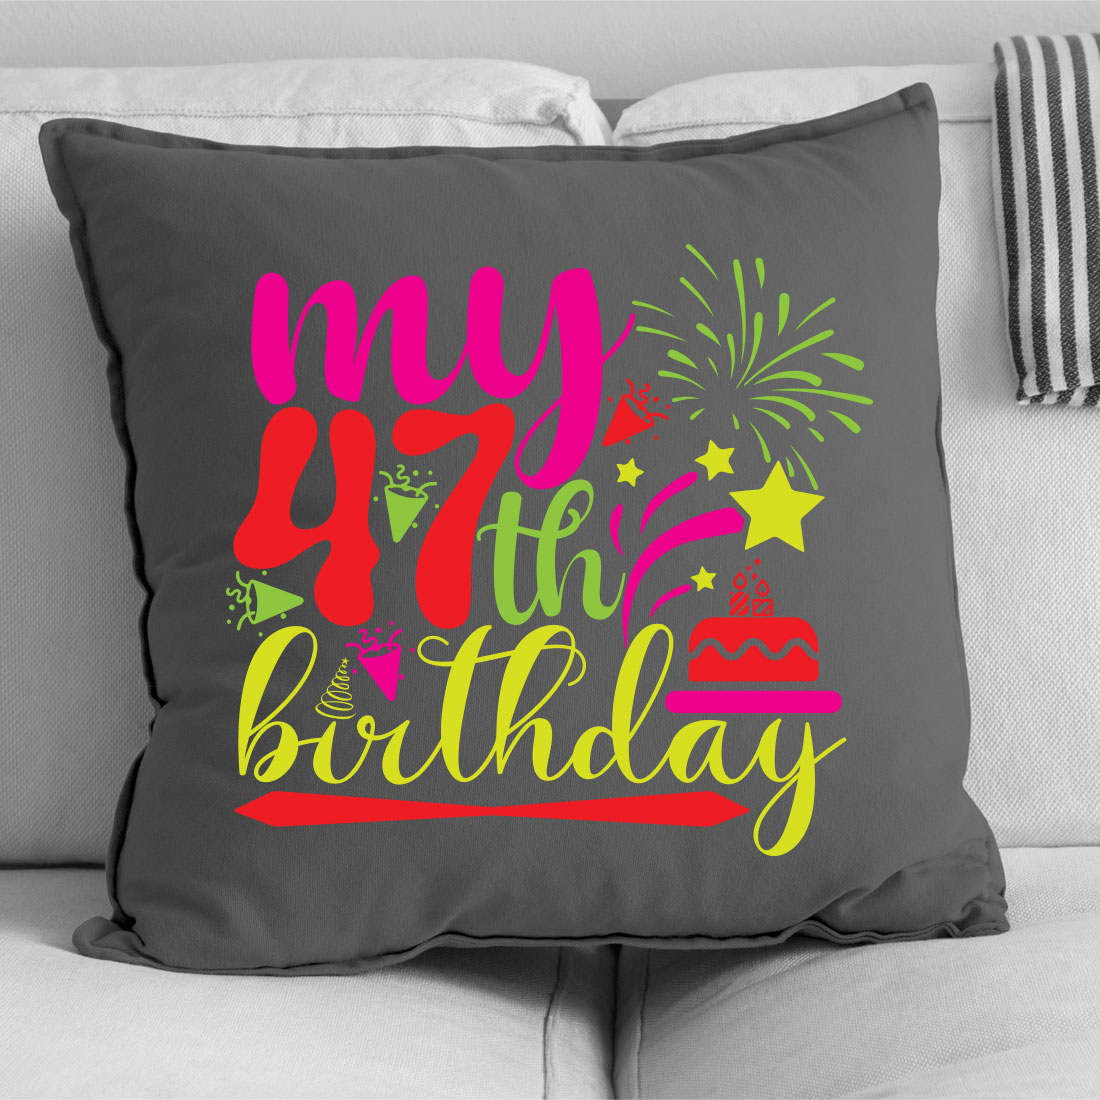 Pillow with a birthday message on it.